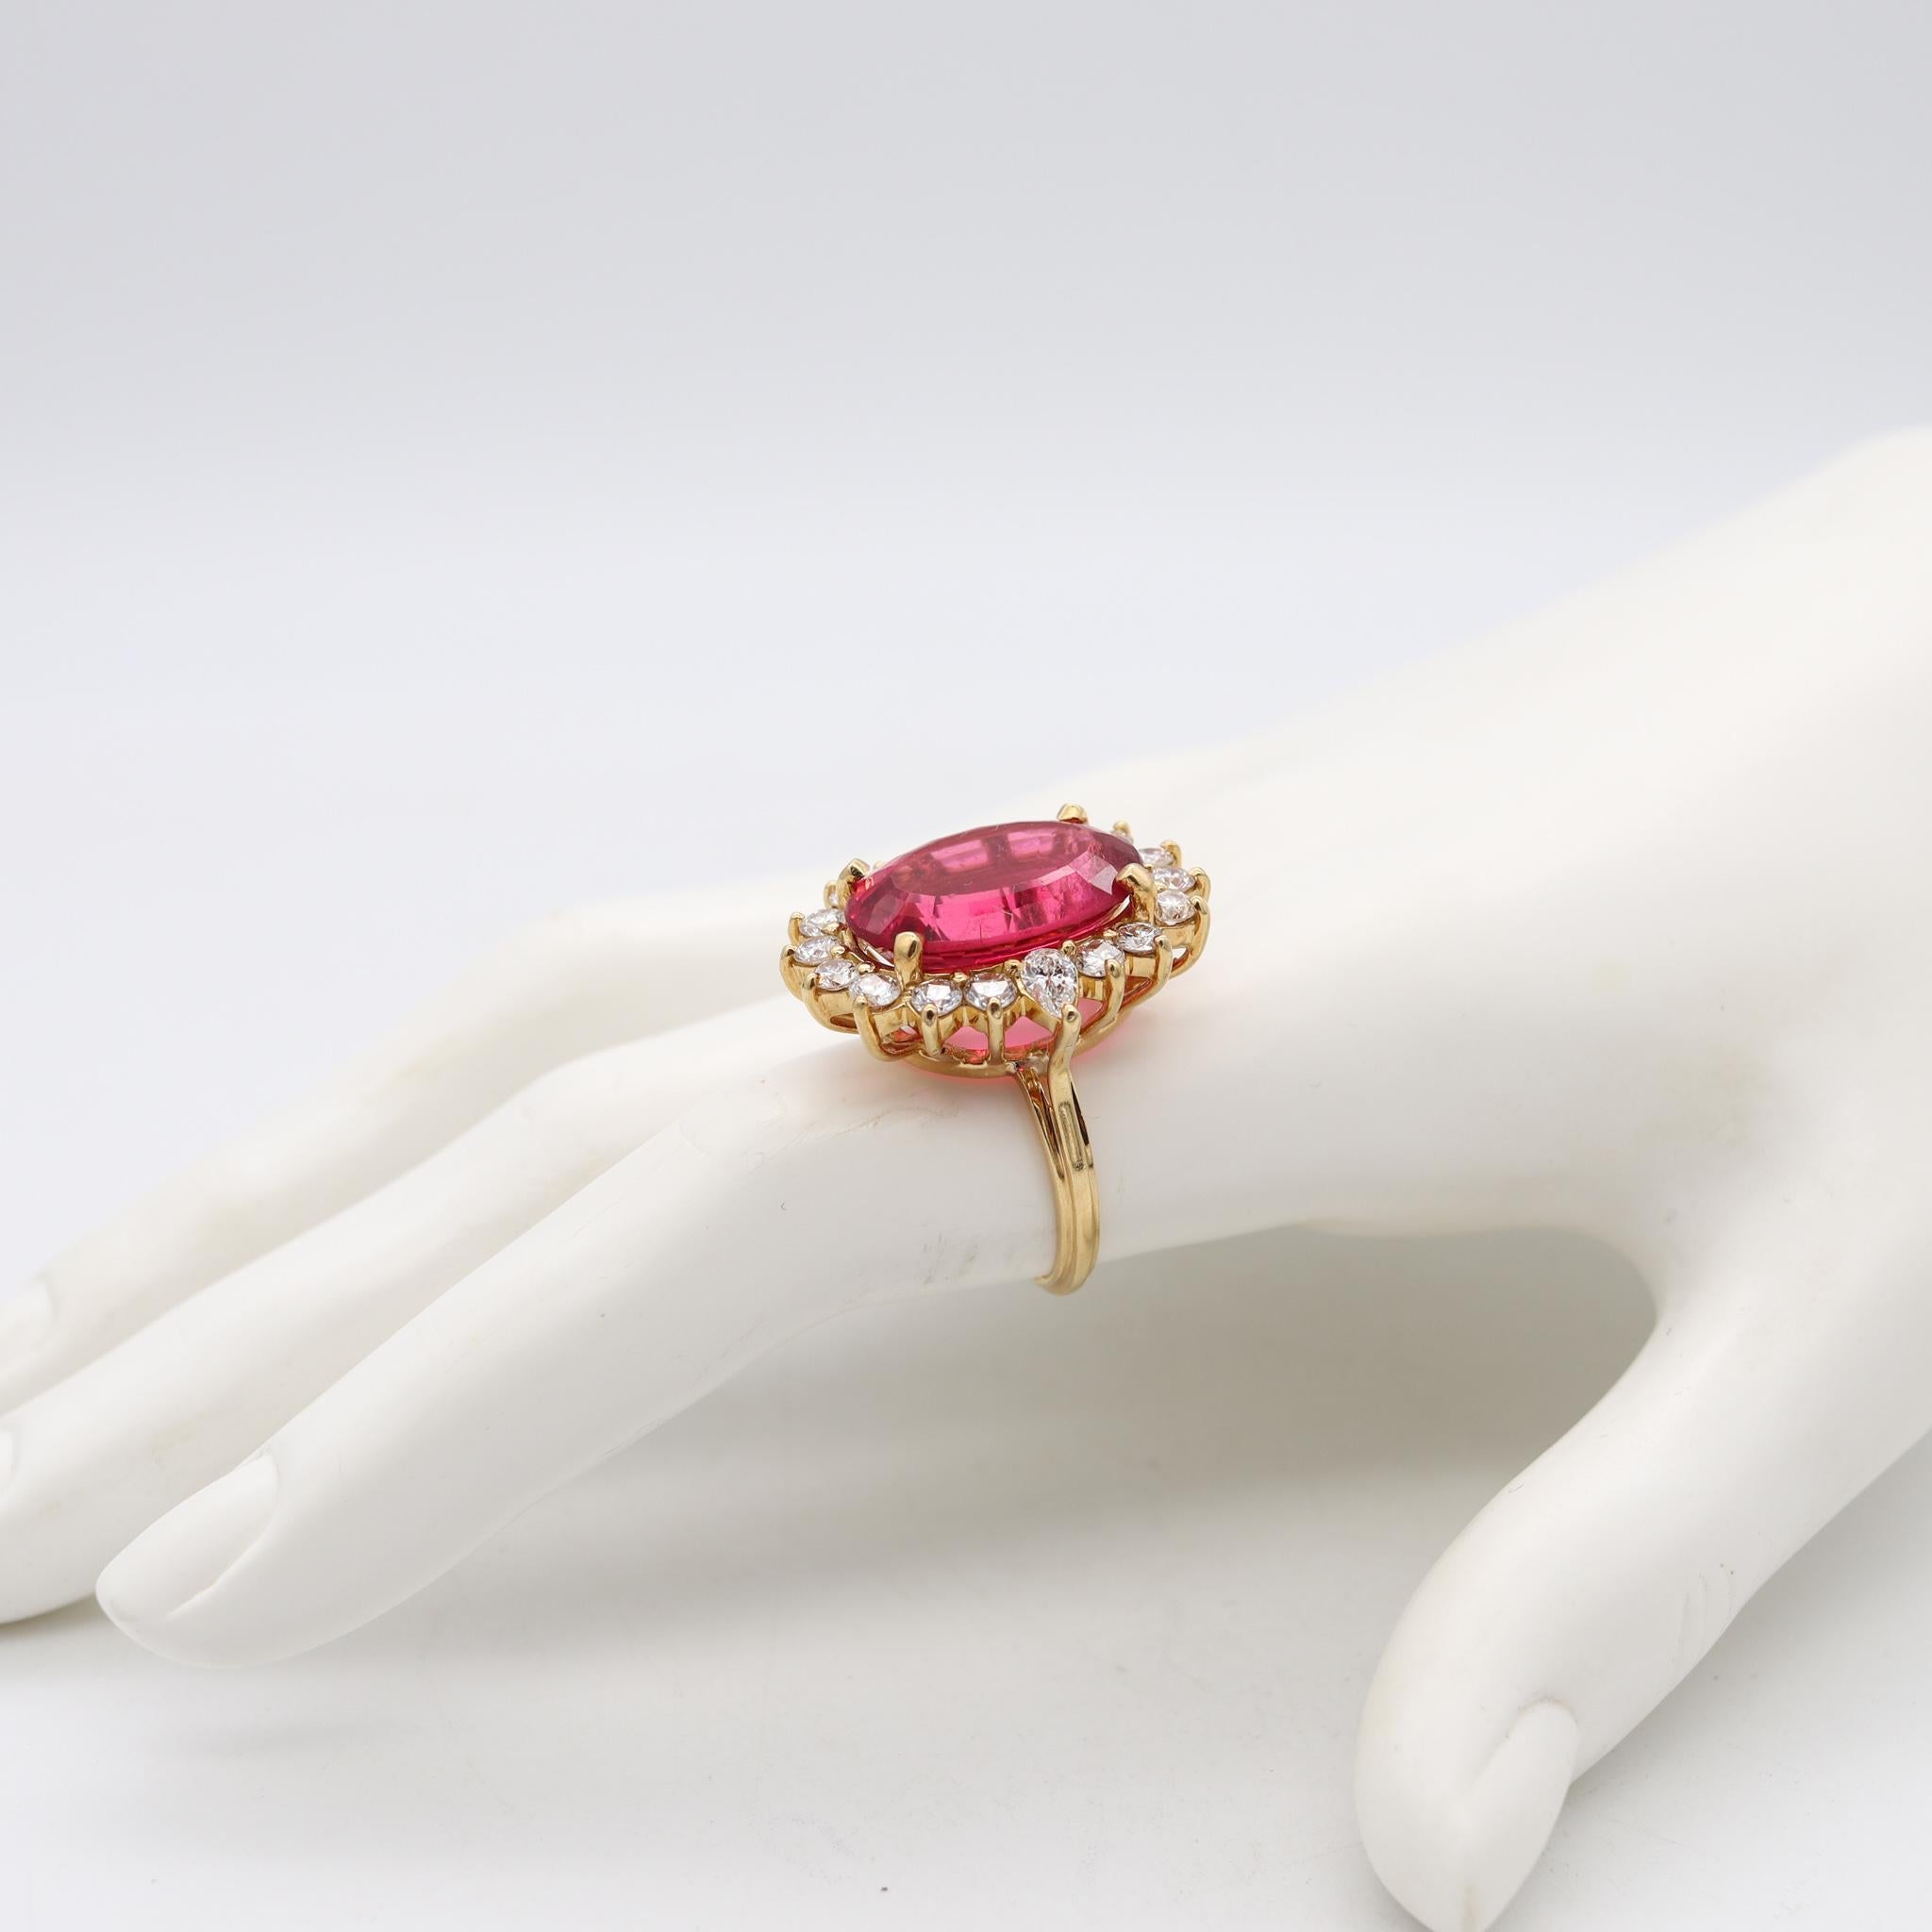 GIA Certified Cocktail Ring in 18kt Gold with 14.80 Ctw Diamonds & Rubellite In Excellent Condition For Sale In Miami, FL